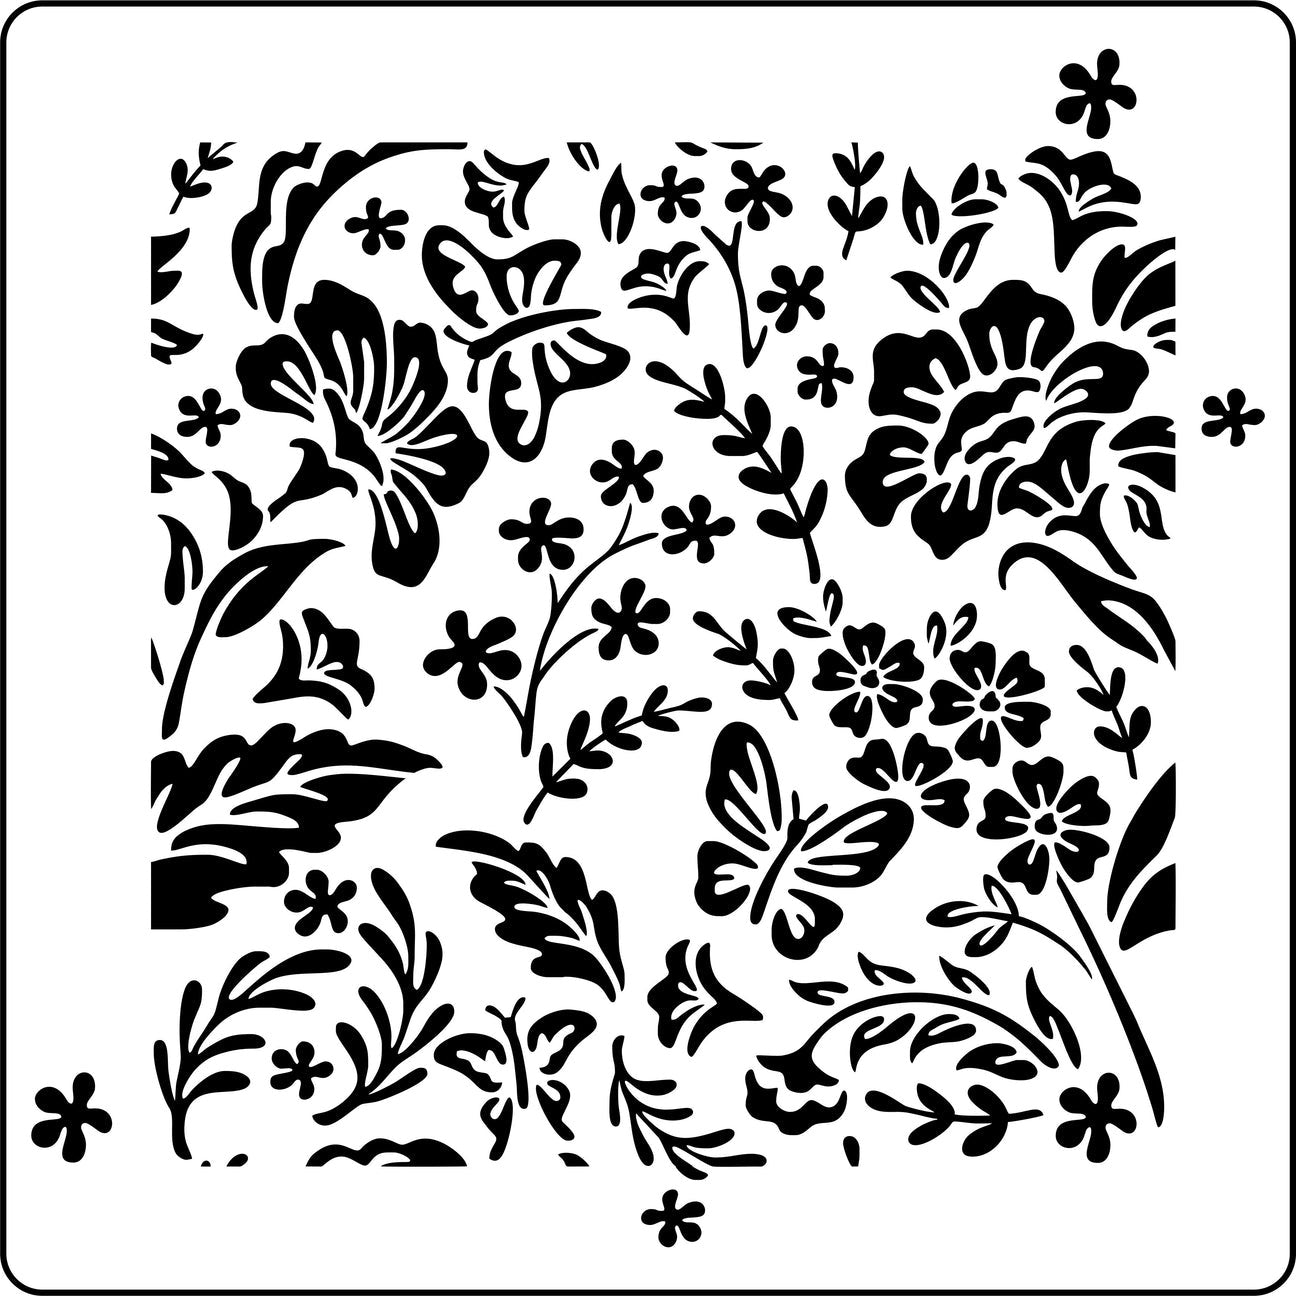 Butterflies and Flowers Tile Stencil